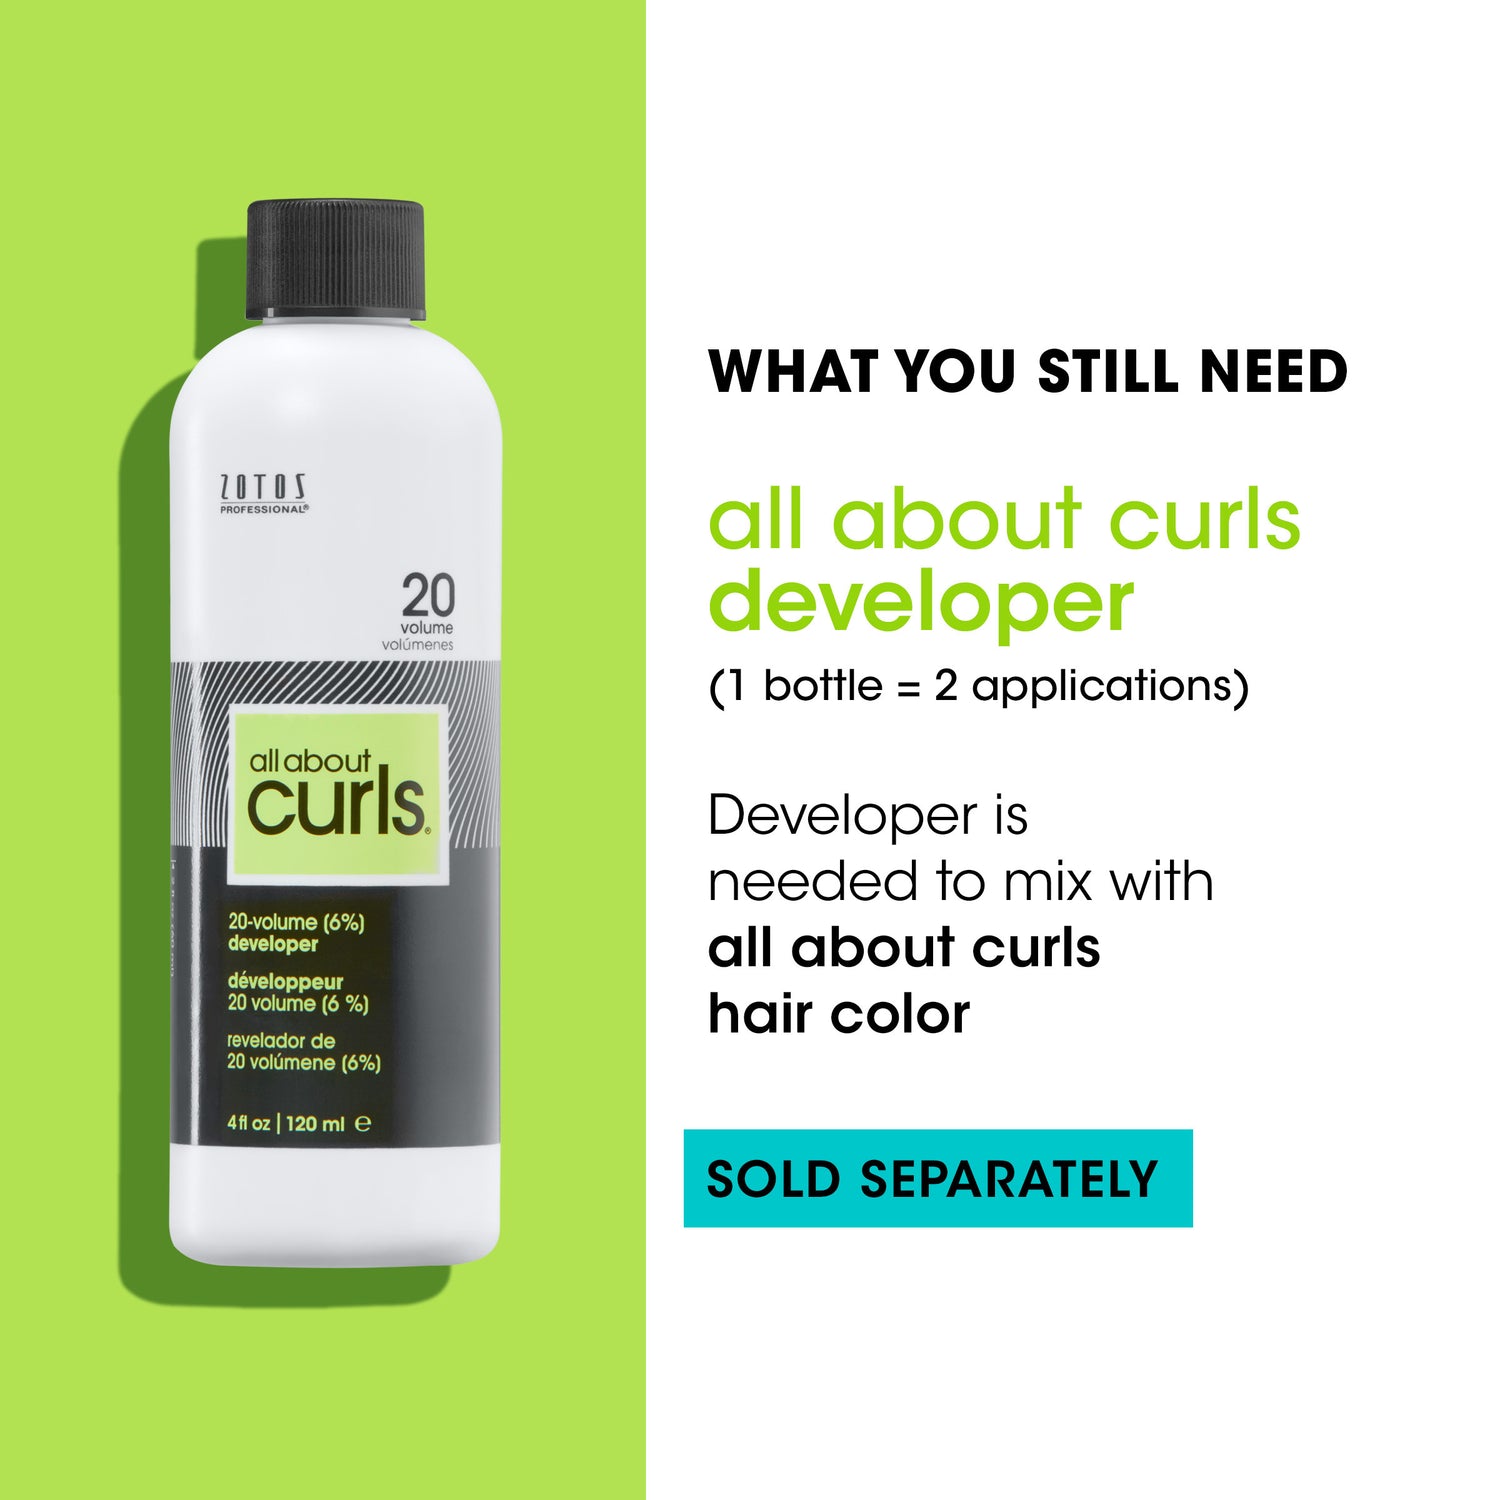 All About Curls™ Quenching Permanent Haircolor For Curls - Red